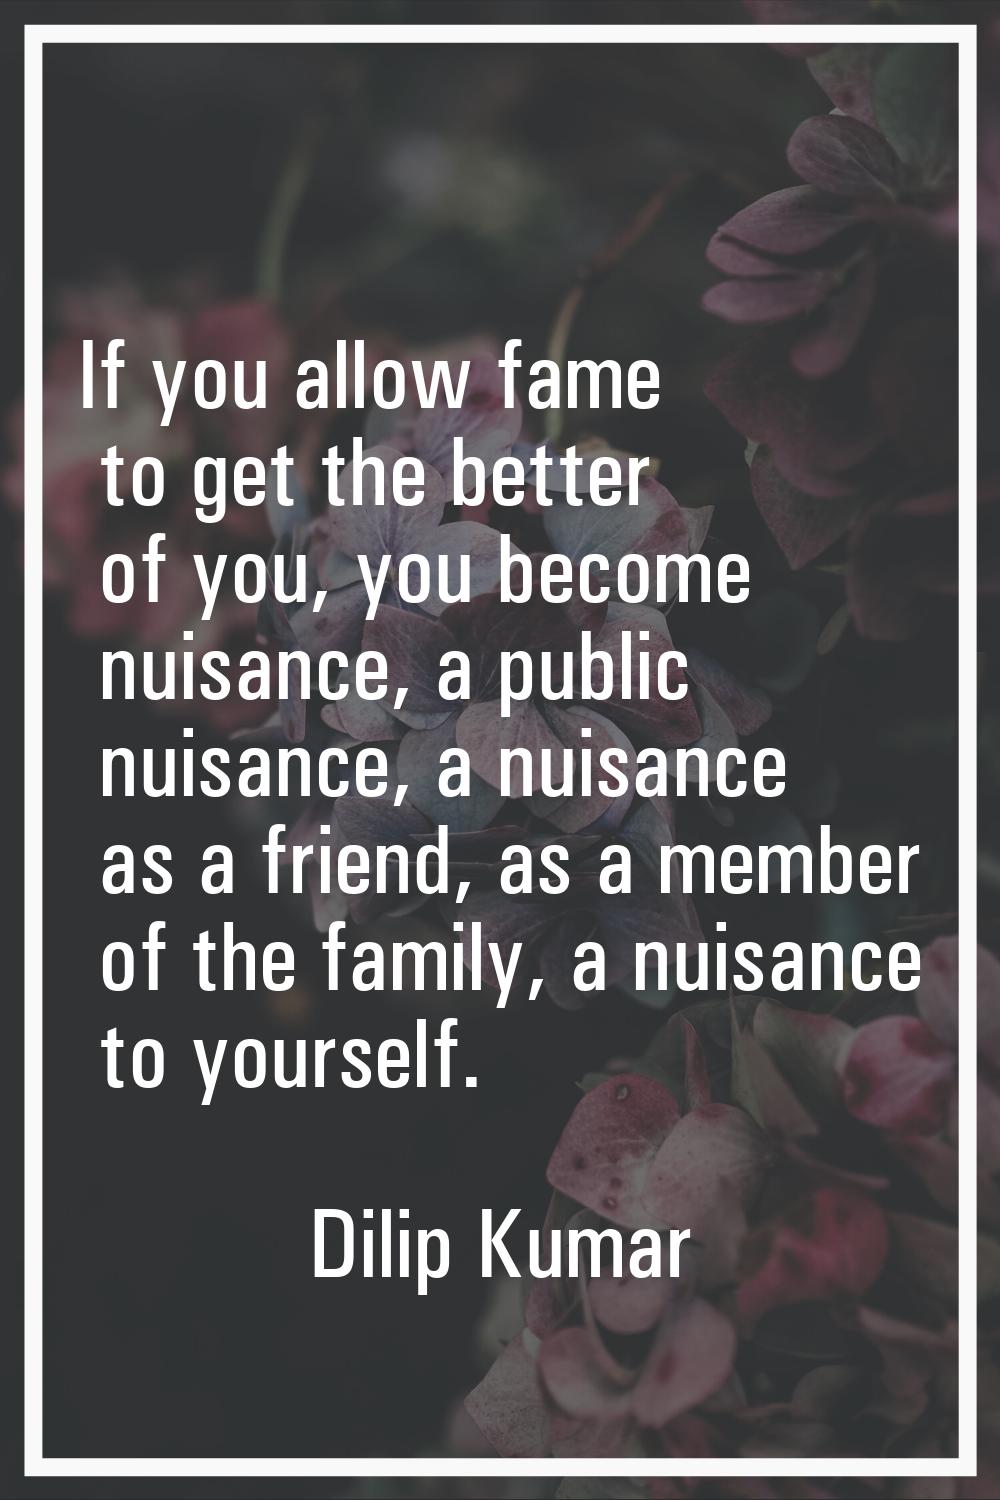 If you allow fame to get the better of you, you become nuisance, a public nuisance, a nuisance as a